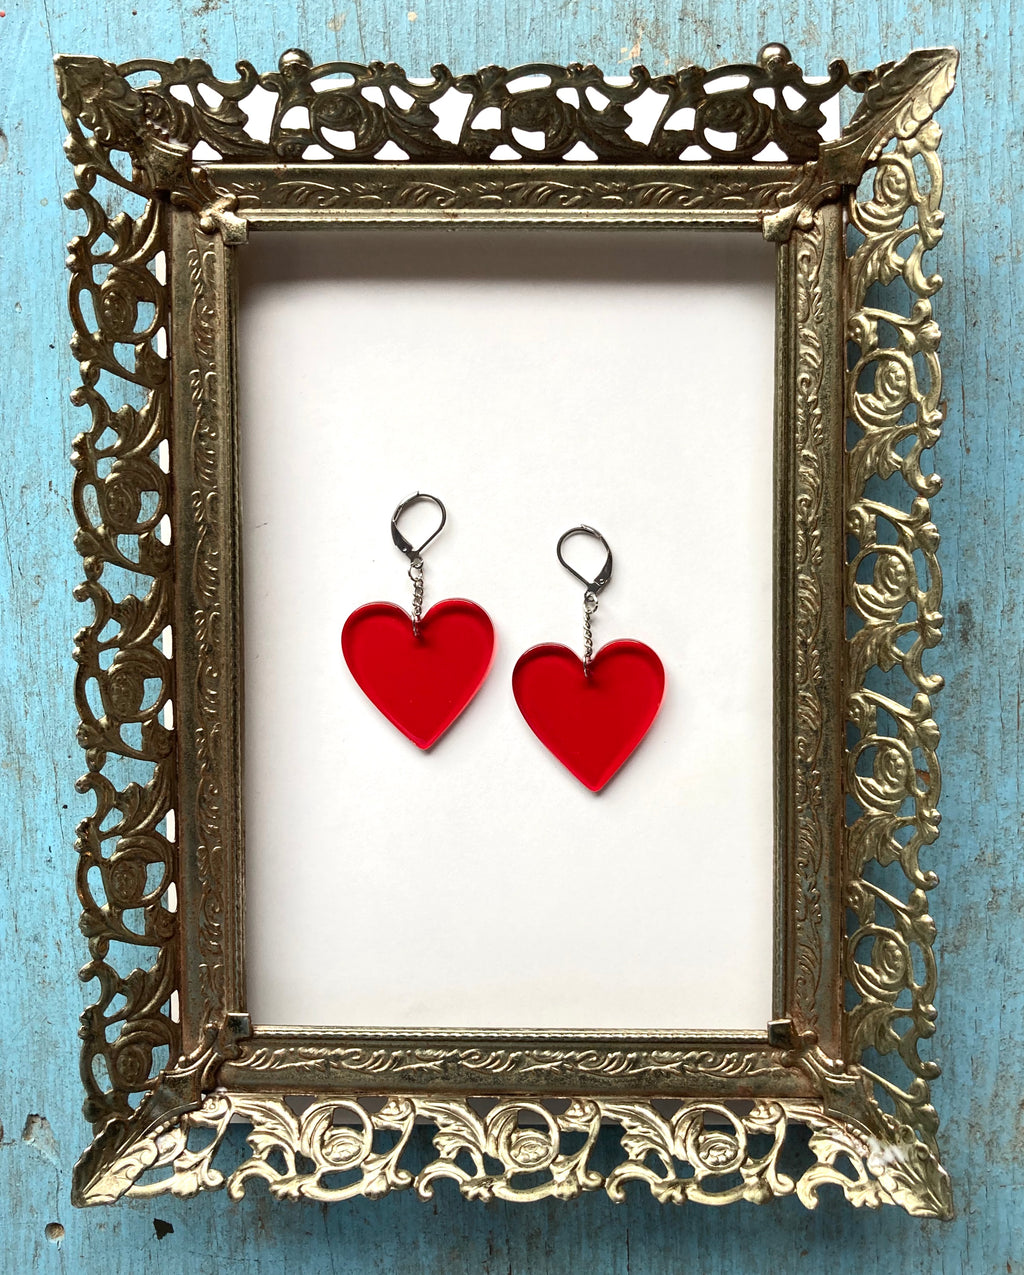 Dangly Red Heart Earrings with Chain